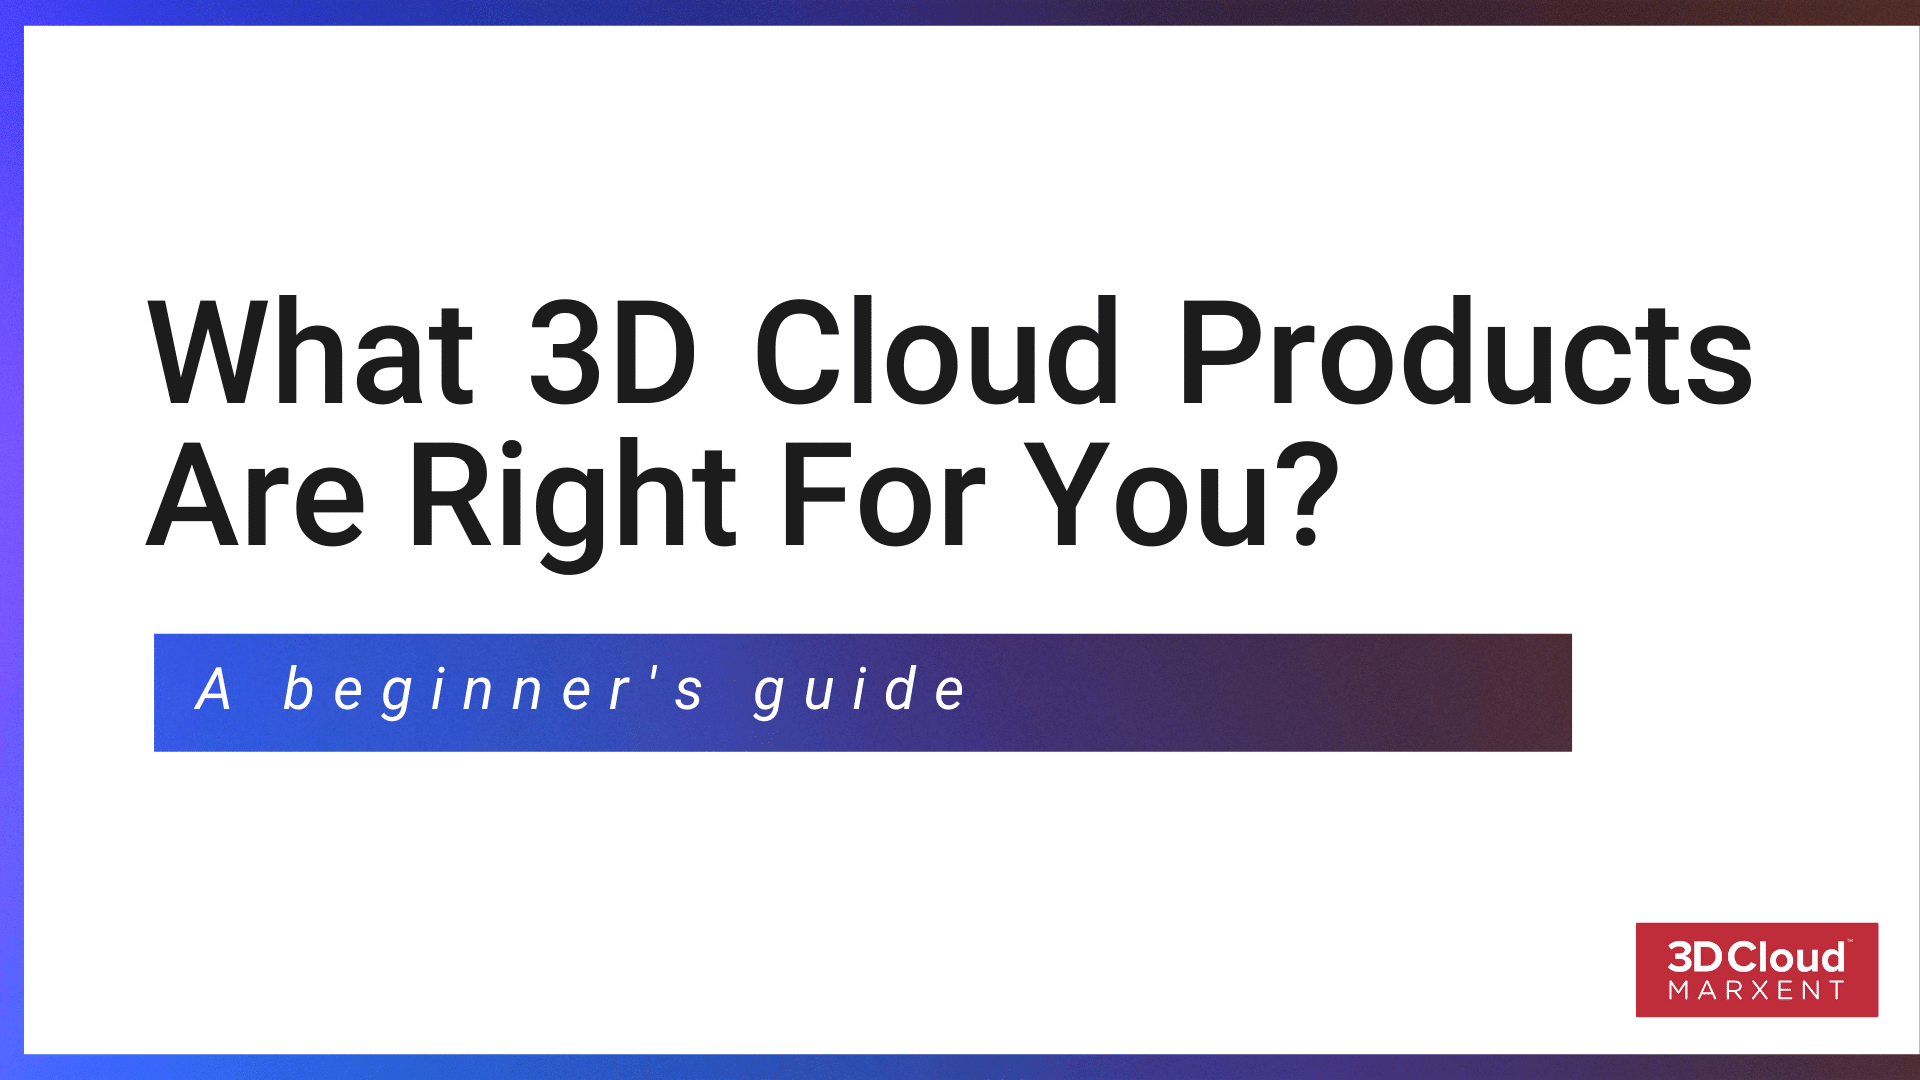 What 3D Cloud Products Are Right For You